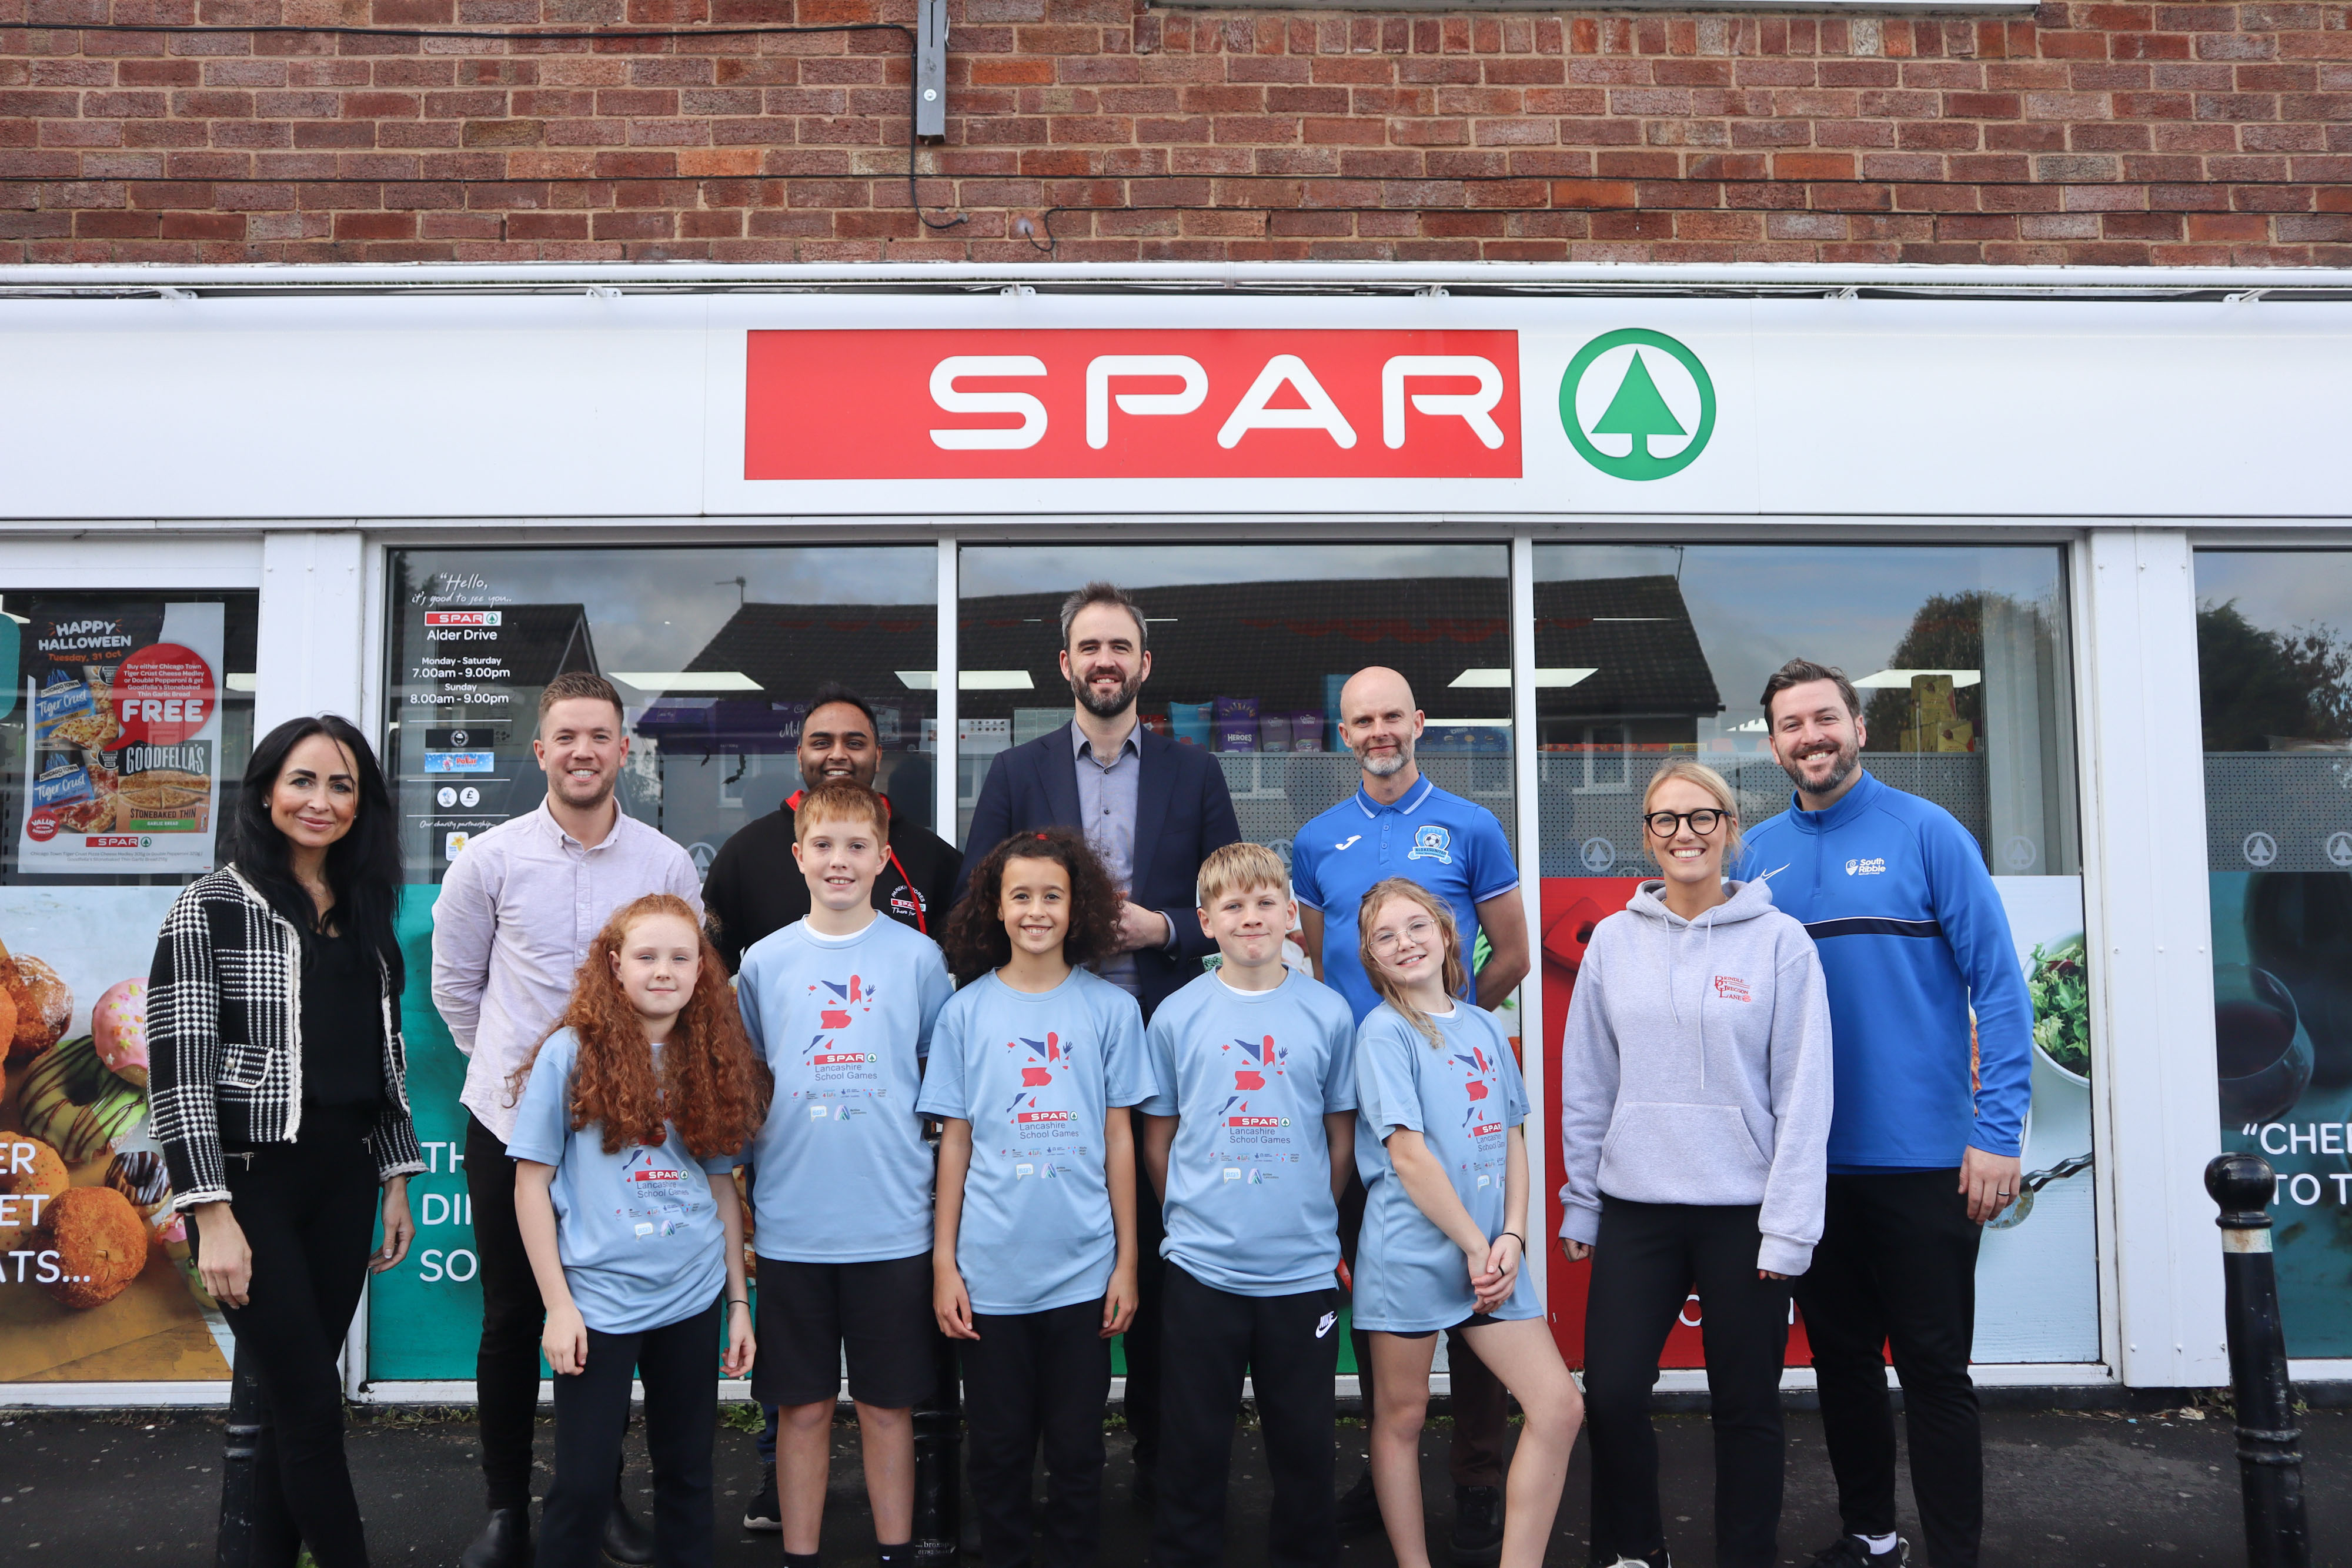 Active Lancashire and SPAR renew sponsorship of School Games for an 18th year